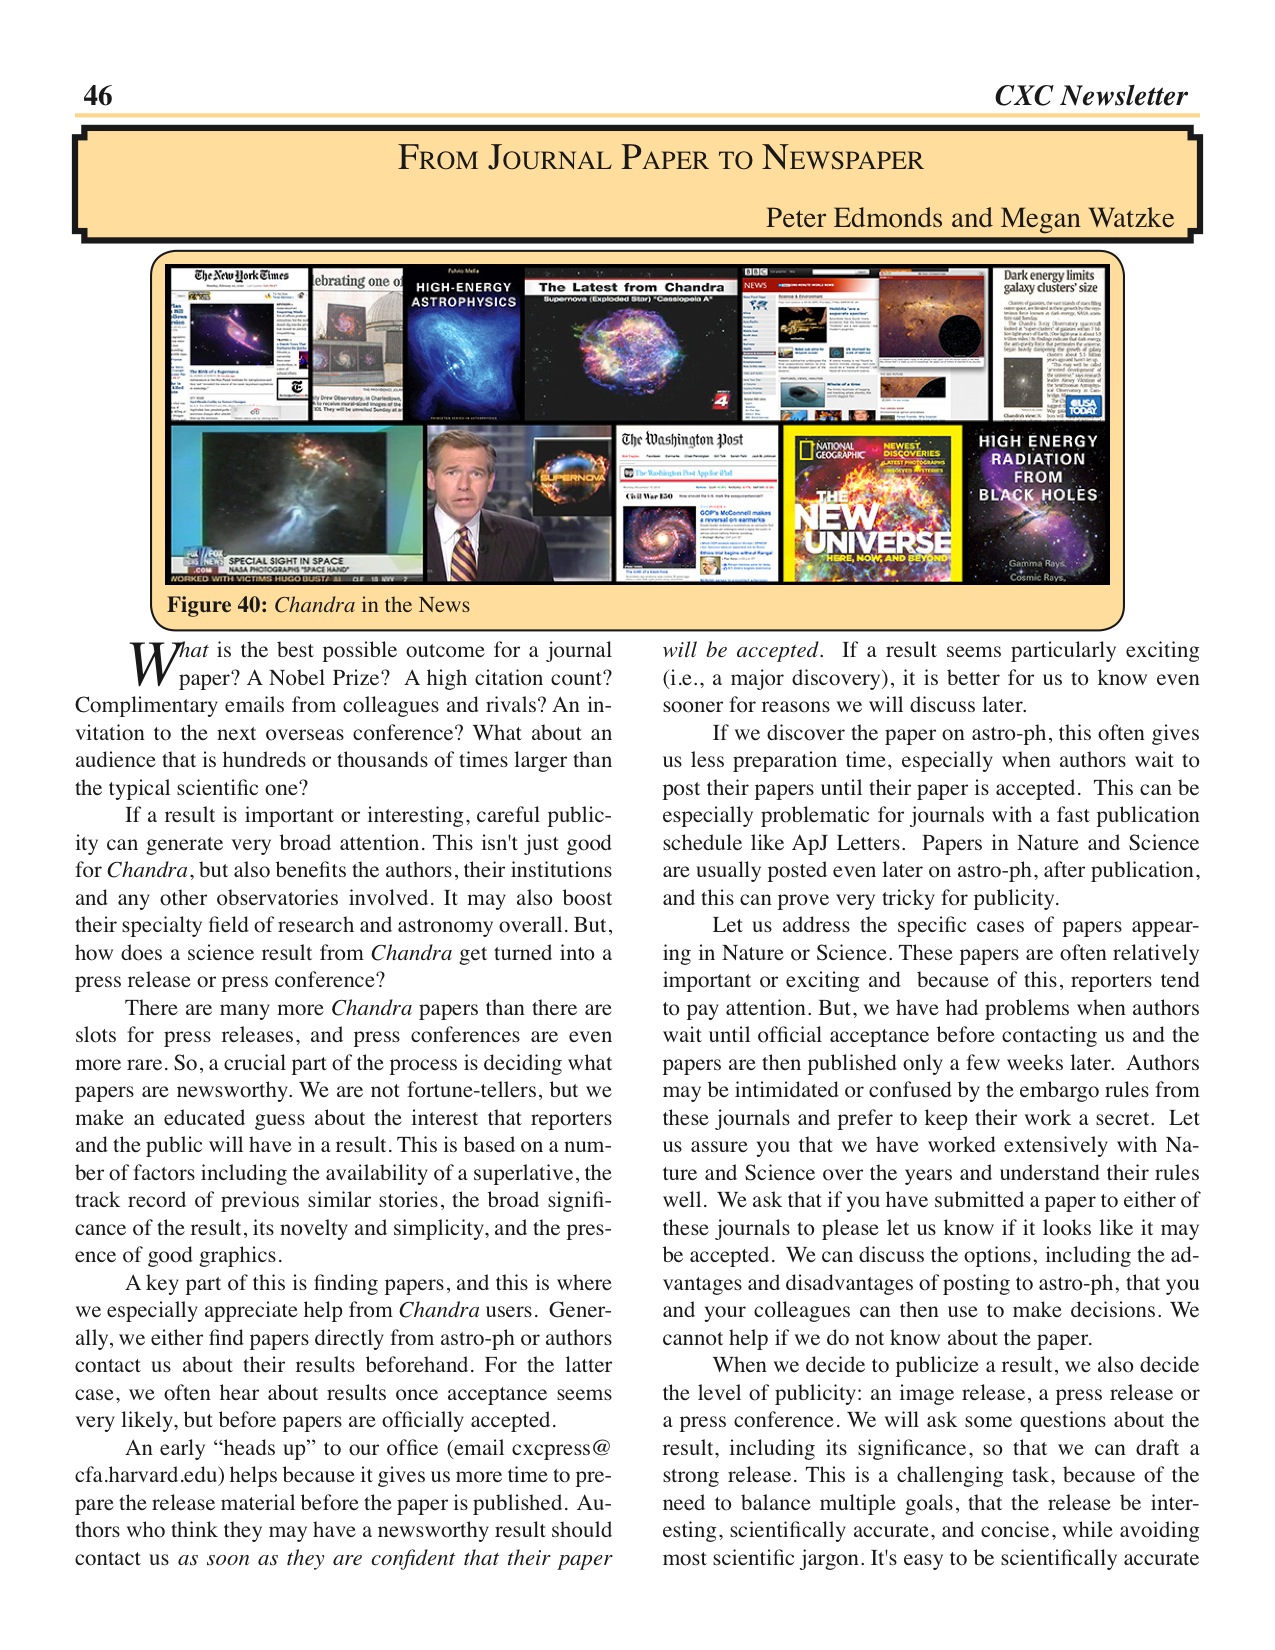 Page 46 of the Chandra Newsletter, issue 18.